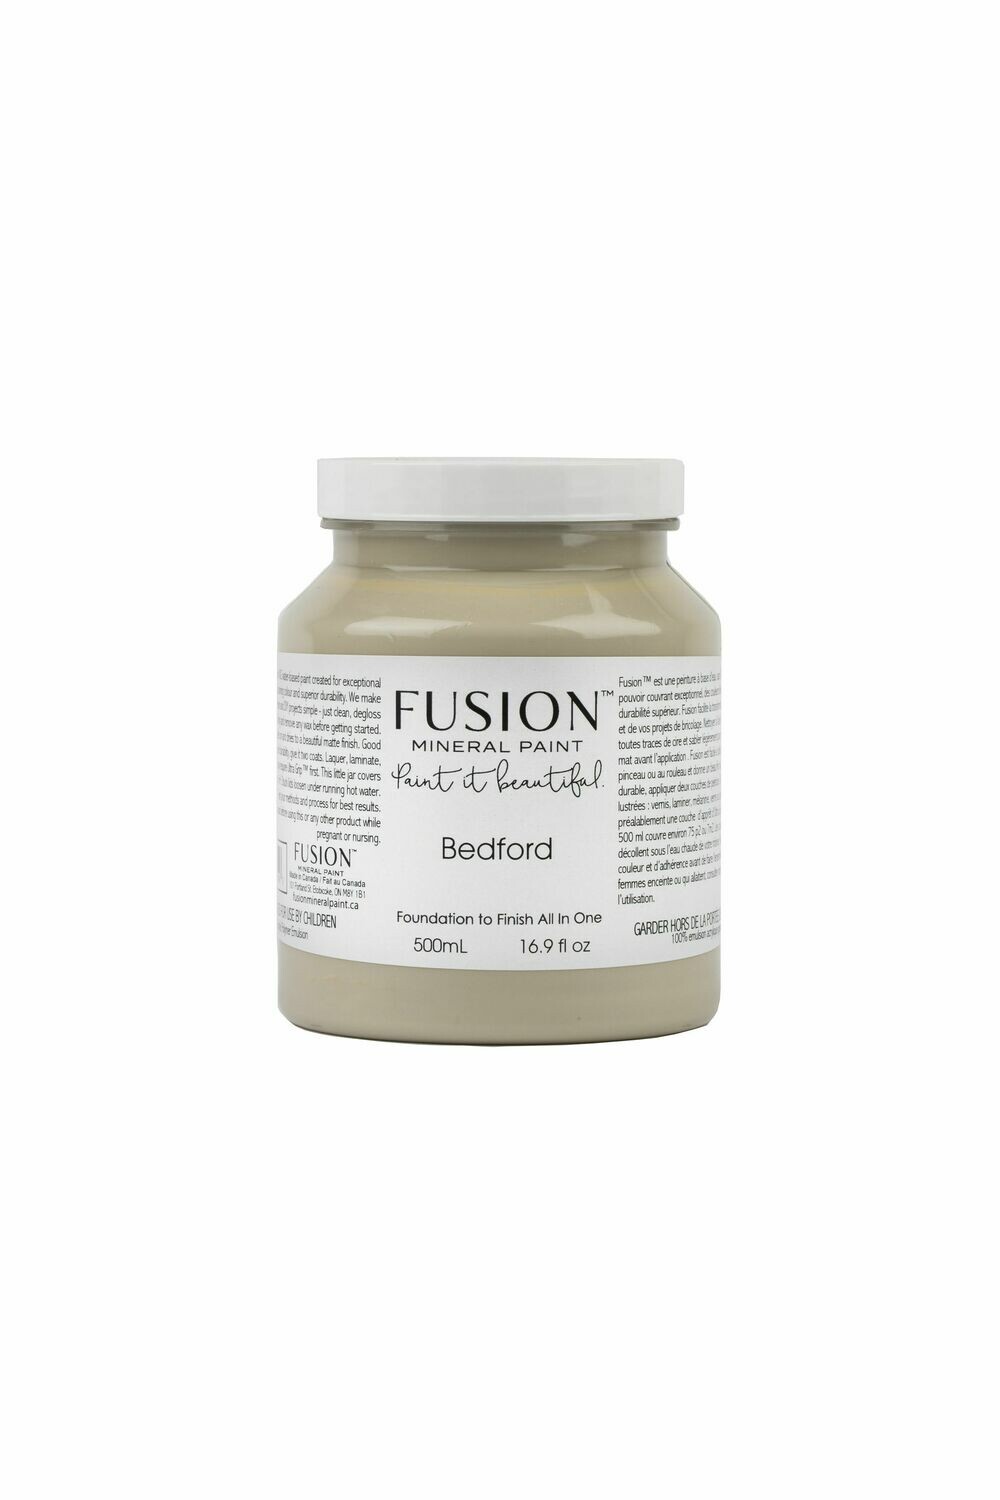 Fusion Mineral Paint Bedford 1 Pint